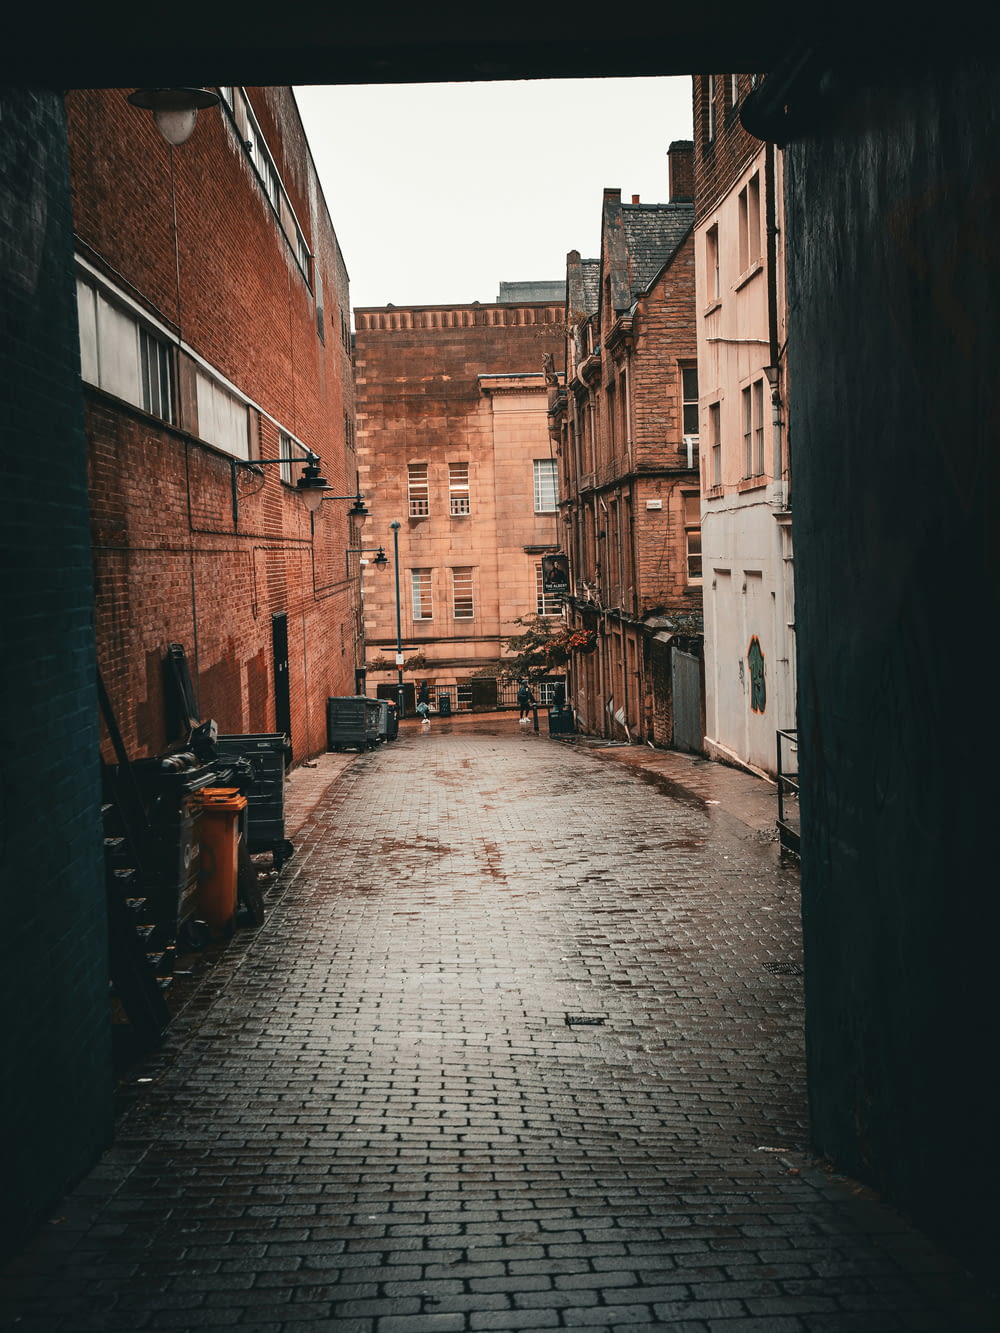 an alley way with a brick walkway between two buildings